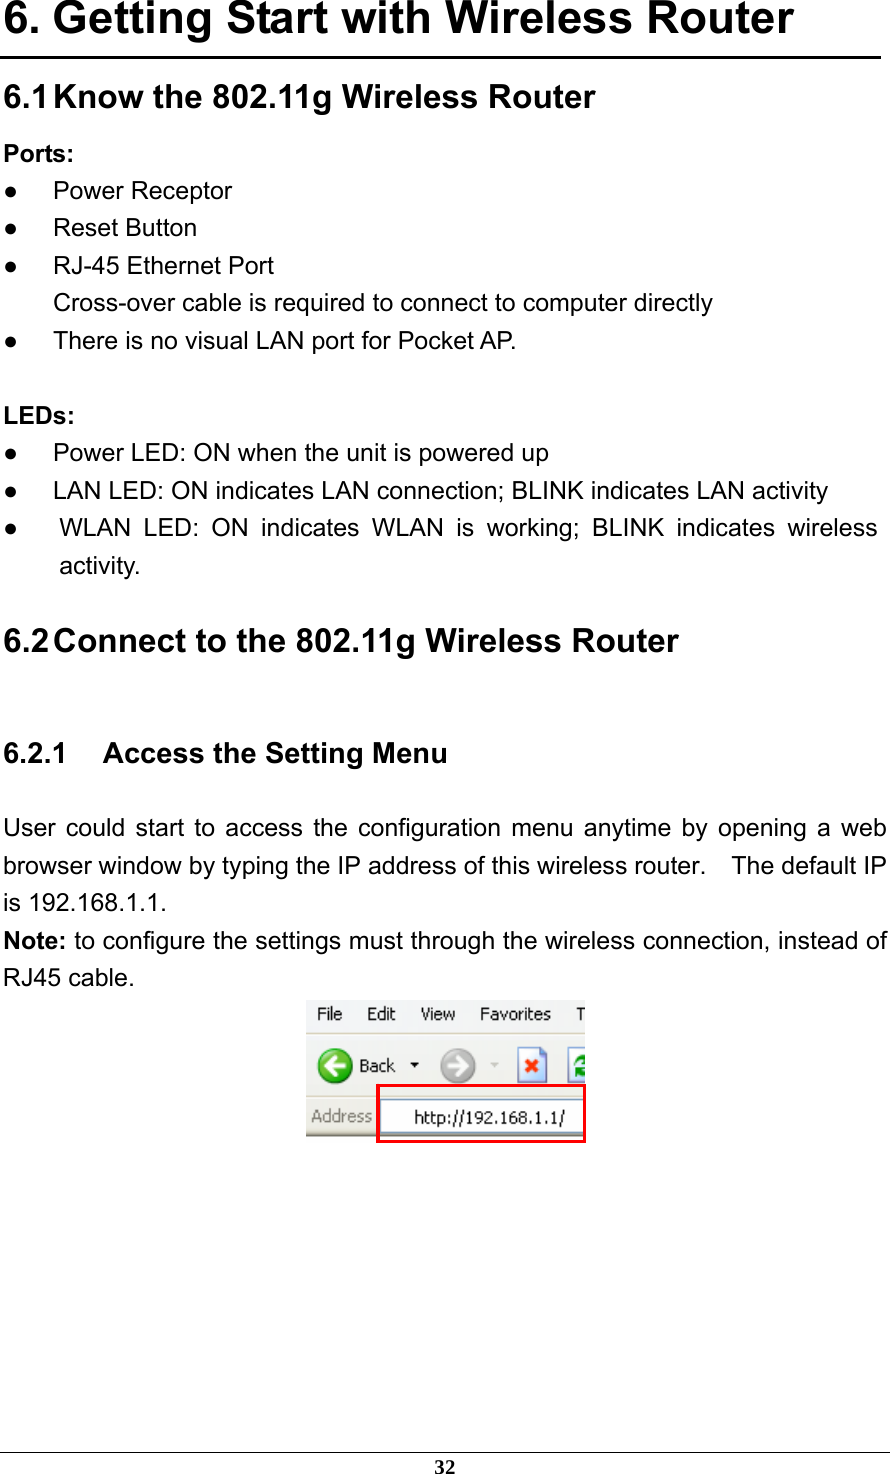 6. Getting Start with Wireless Router 6.1 Know the 802.11g Wireless Router Ports: ● Power Receptor ● Reset Button ●  RJ-45 Ethernet Port Cross-over cable is required to connect to computer directly ●  There is no visual LAN port for Pocket AP.  LEDs: ●  Power LED: ON when the unit is powered up ●  LAN LED: ON indicates LAN connection; BLINK indicates LAN activity ●  WLAN LED: ON indicates WLAN is working; BLINK indicates wireless activity. 6.2 Connect to the 802.11g Wireless Router 6.2.1  Access the Setting Menu User could start to access the configuration menu anytime by opening a web browser window by typing the IP address of this wireless router.    The default IP is 192.168.1.1.   Note: to configure the settings must through the wireless connection, instead of RJ45 cable.         32 